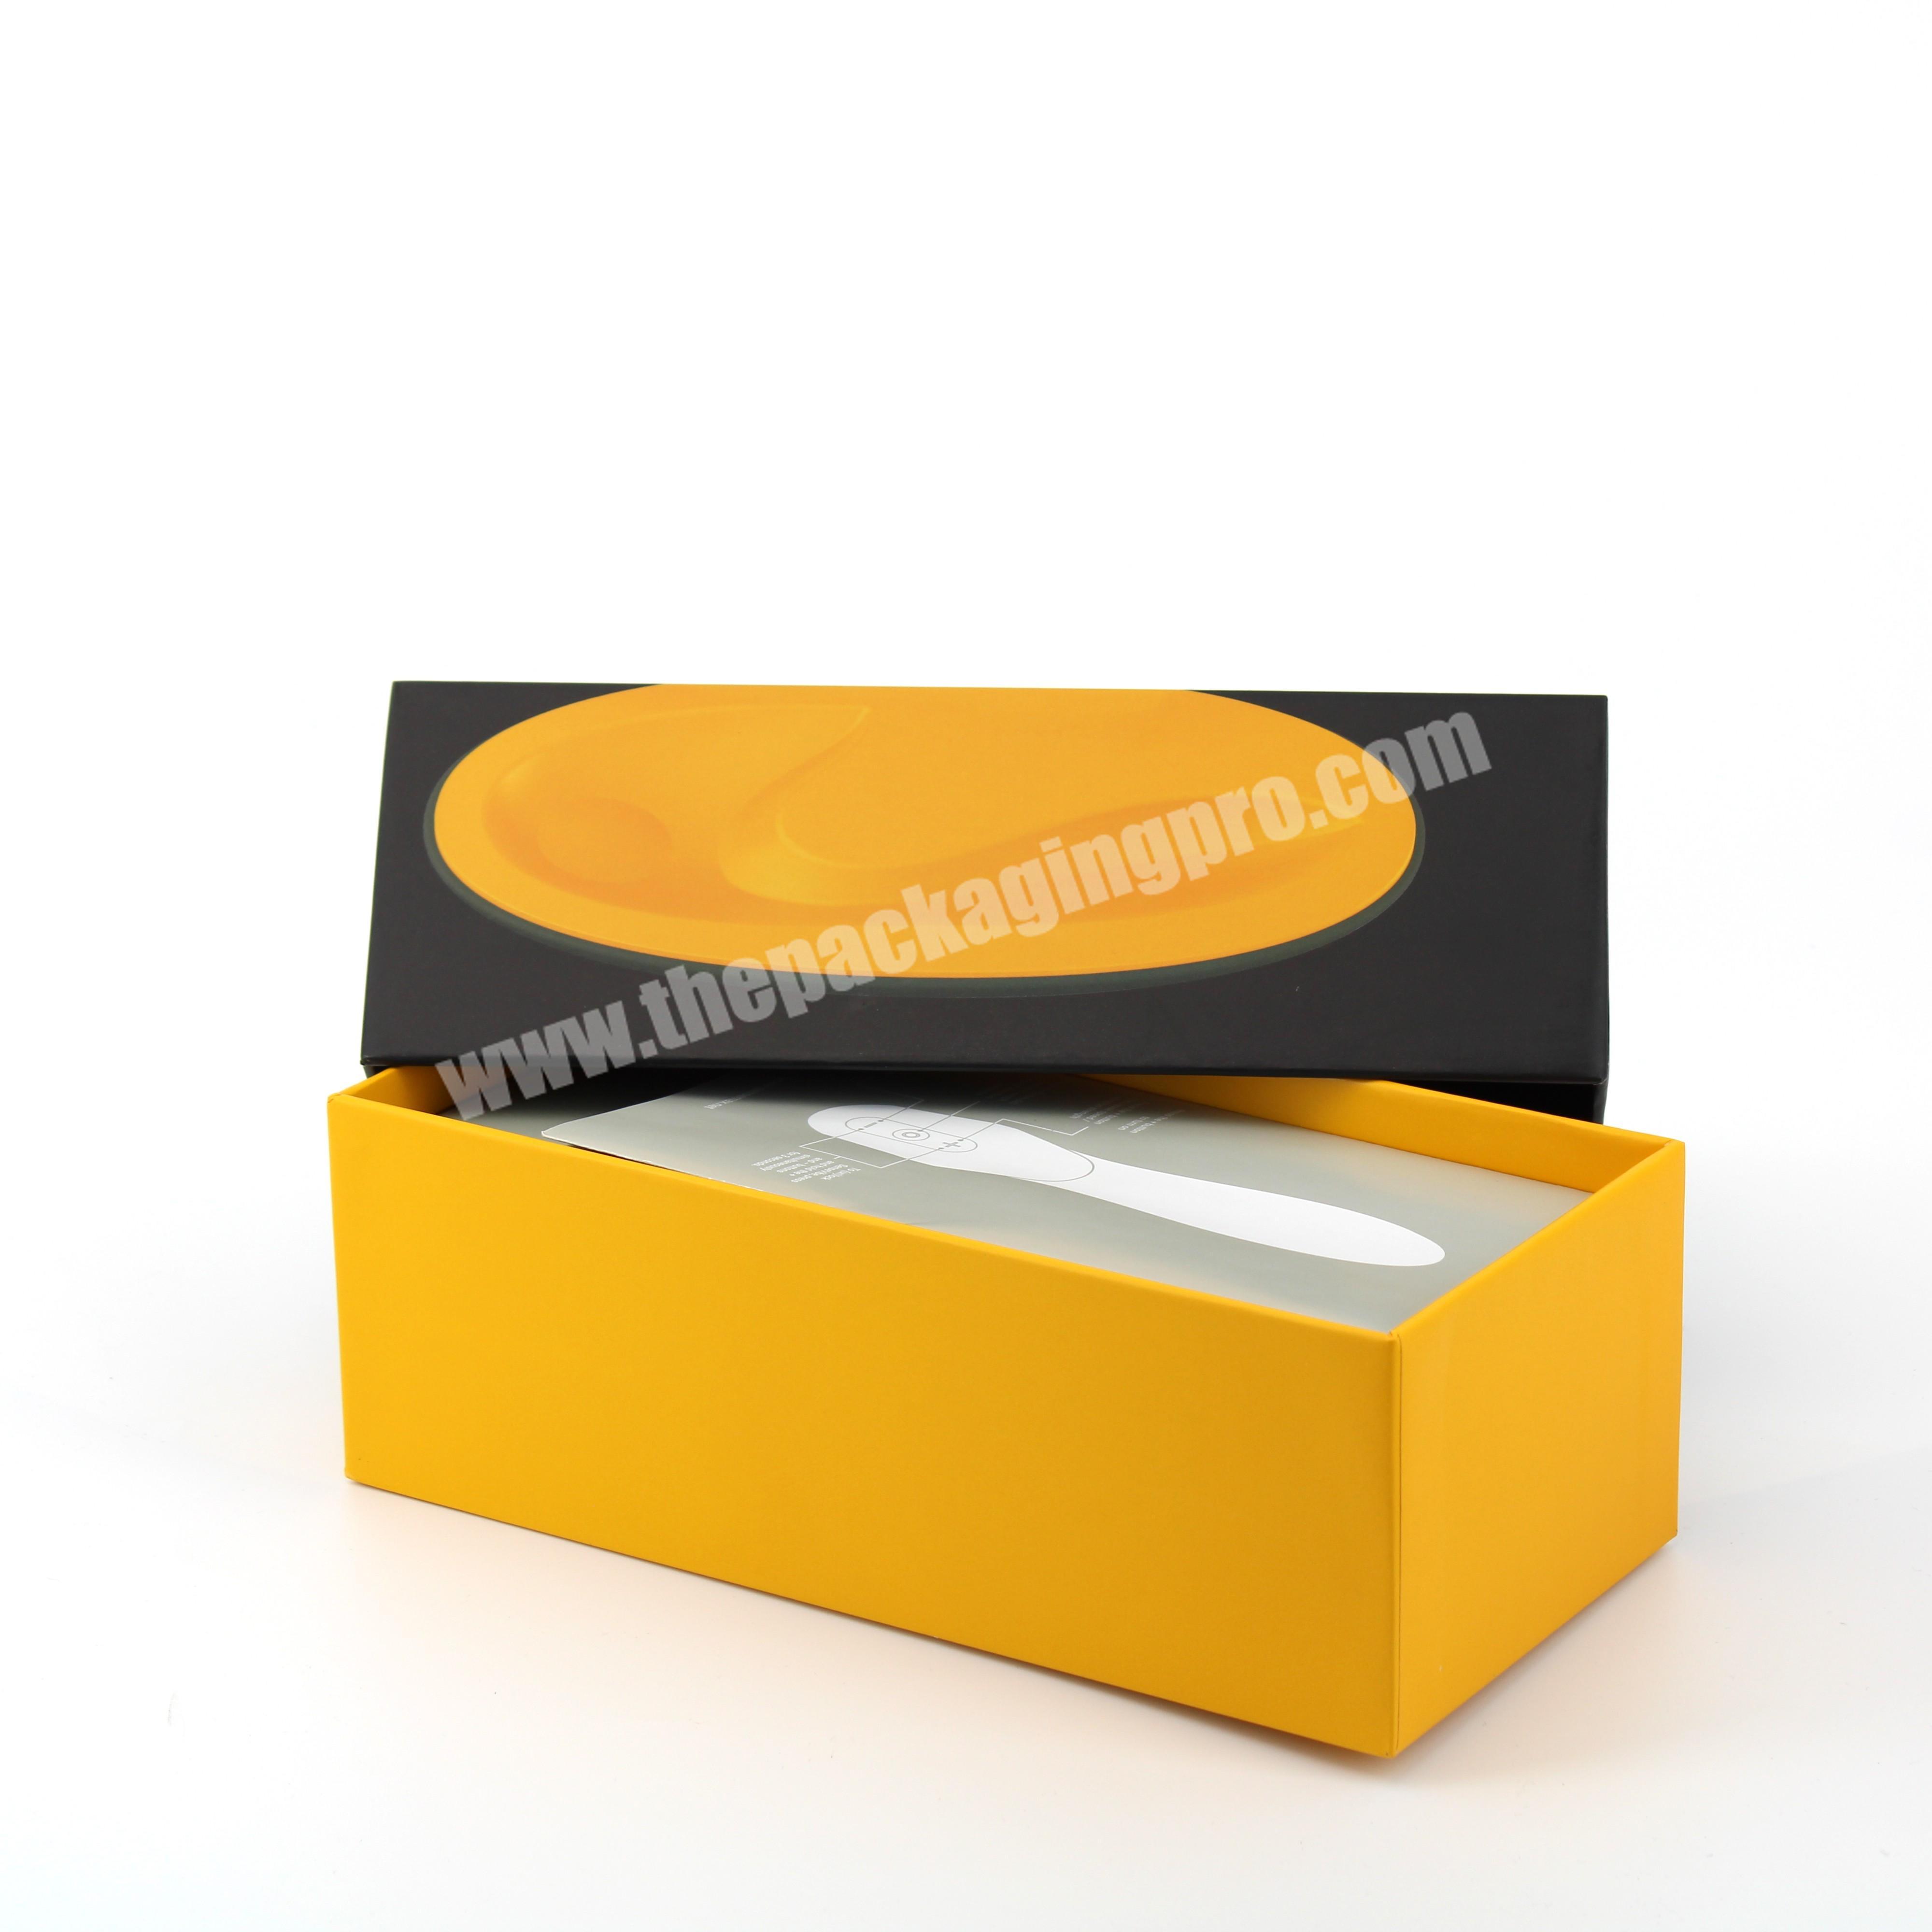 Wholesale factory price base Drawer box Adult Products packing box with logo